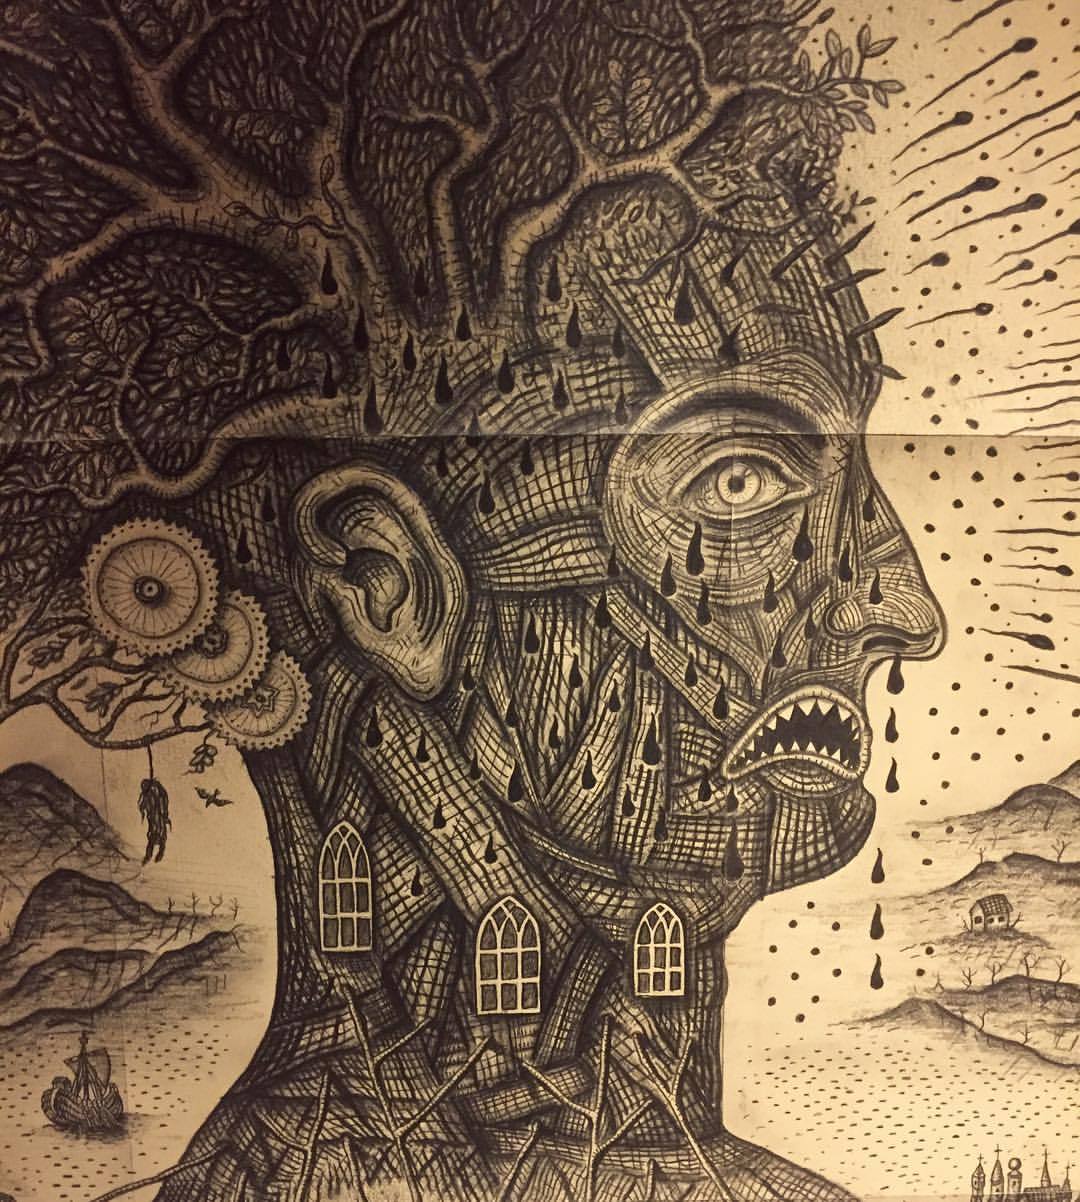 DANIEL MARTIN DIAZ — ‘Pain Tree’ in process. “There is no coming to...